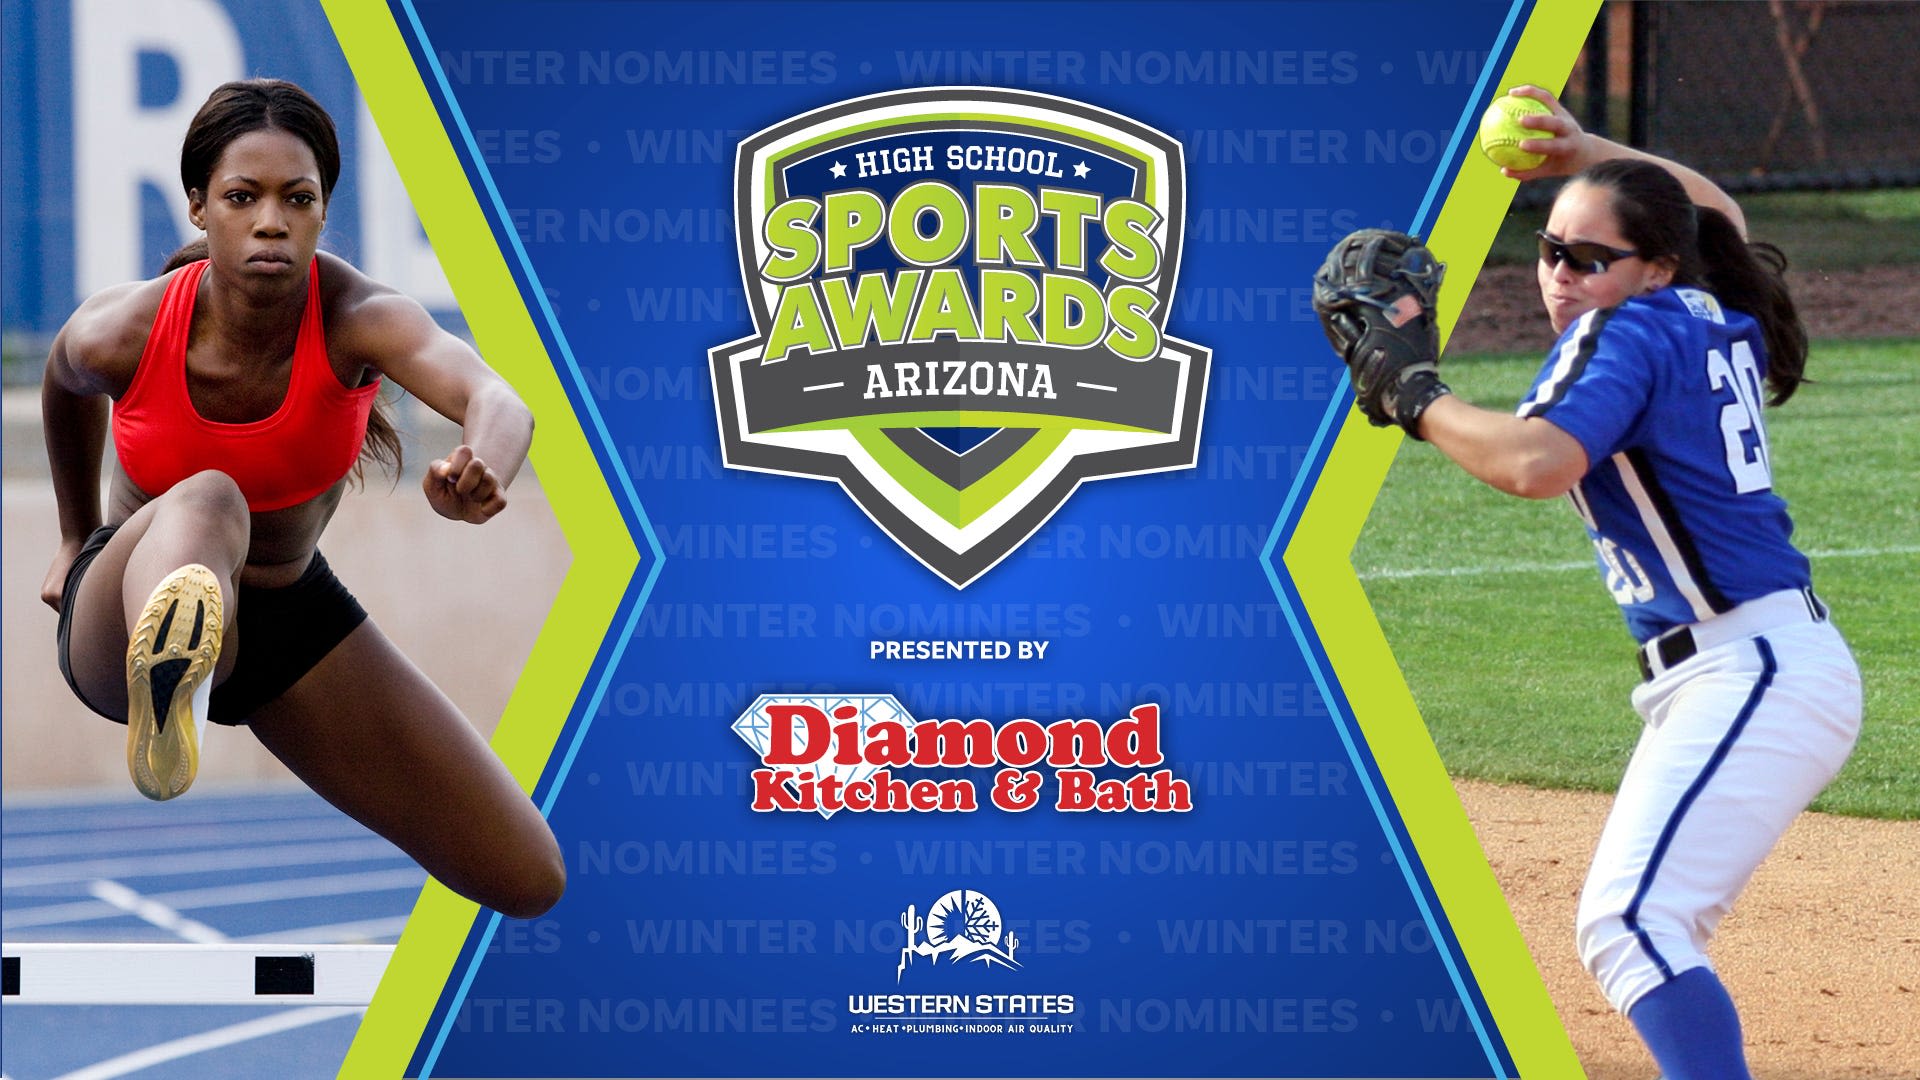 Meet the spring sports nominees for the Arizona High School Sports Awards